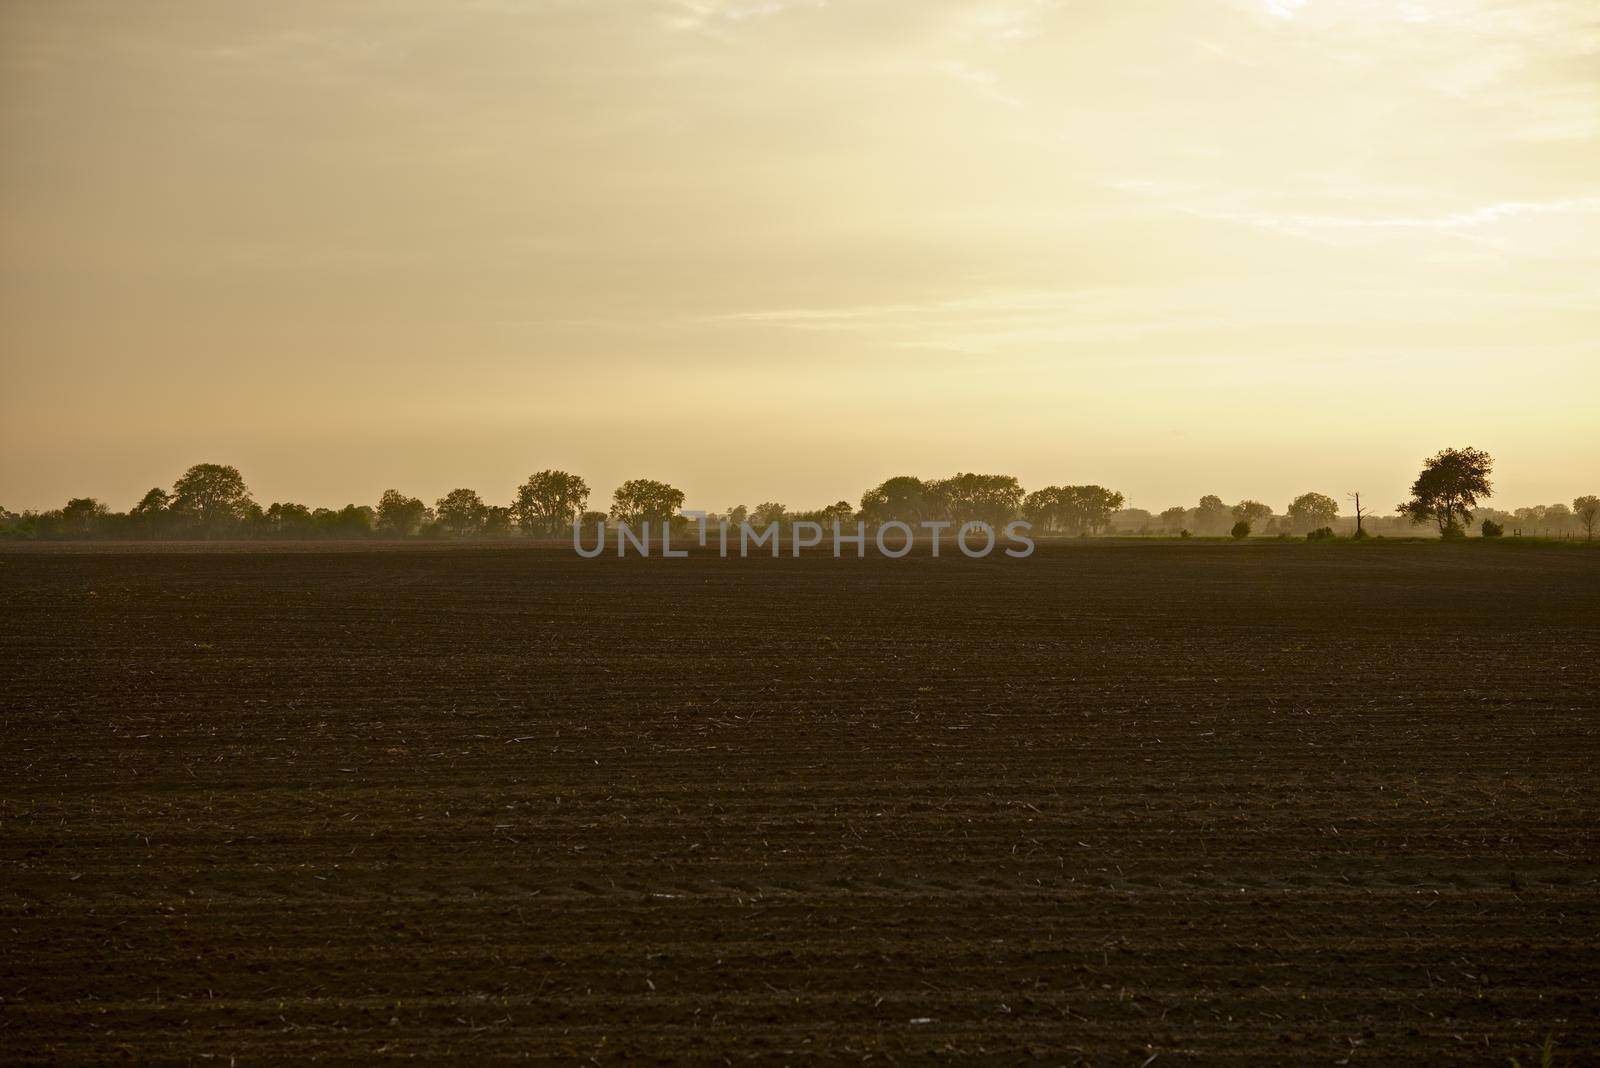 Illinois Farmlands. American Midwest Agriculture Photo Collection. Illinois State, USA. by welcomia